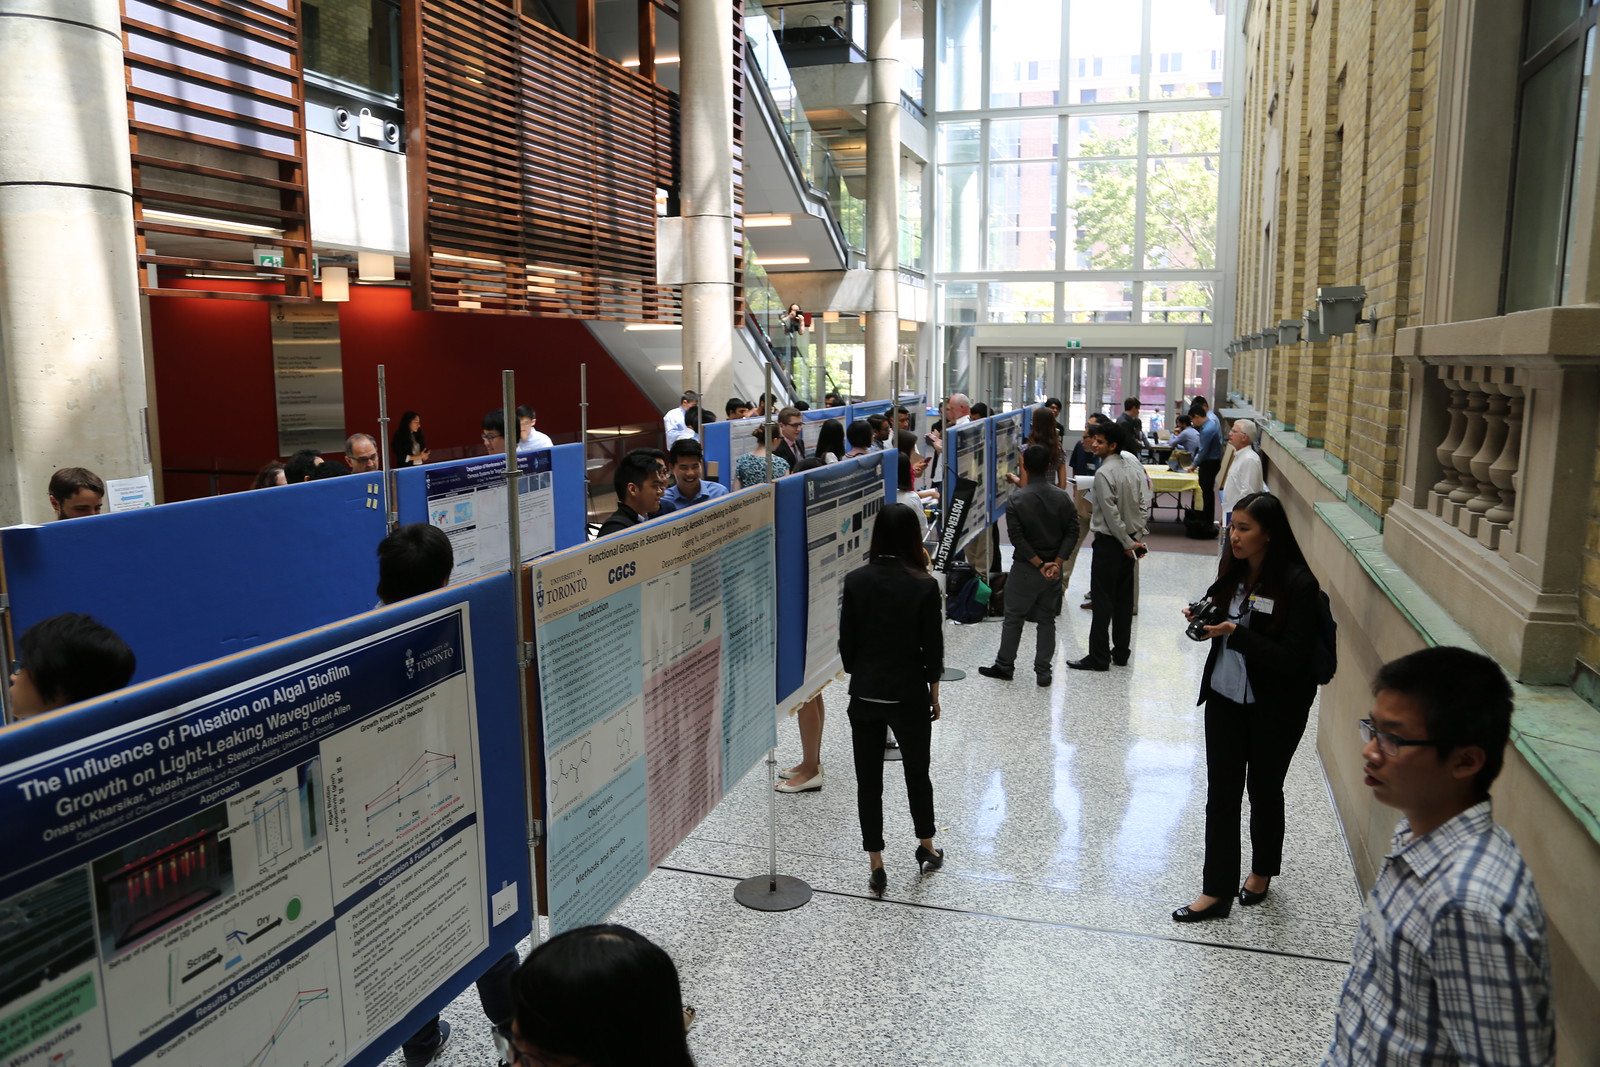 Research posters in Bahen Centre foyer for Engineering Research Day